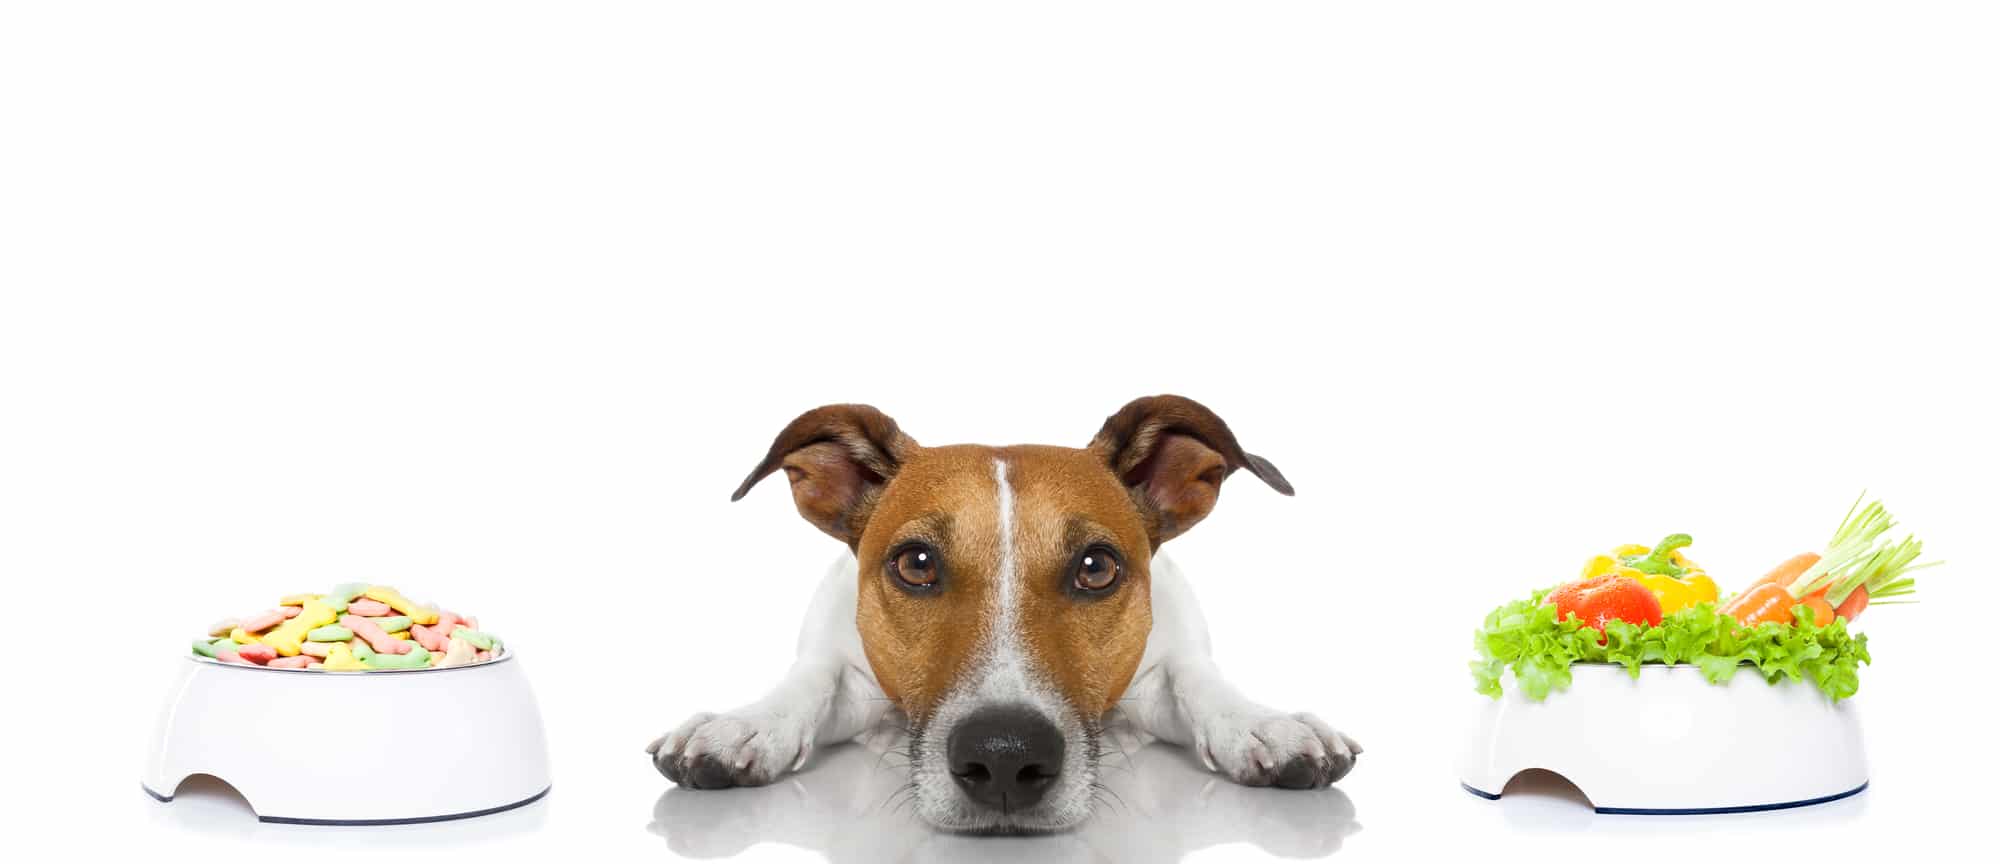 What To Look for in Dog Training Treats?